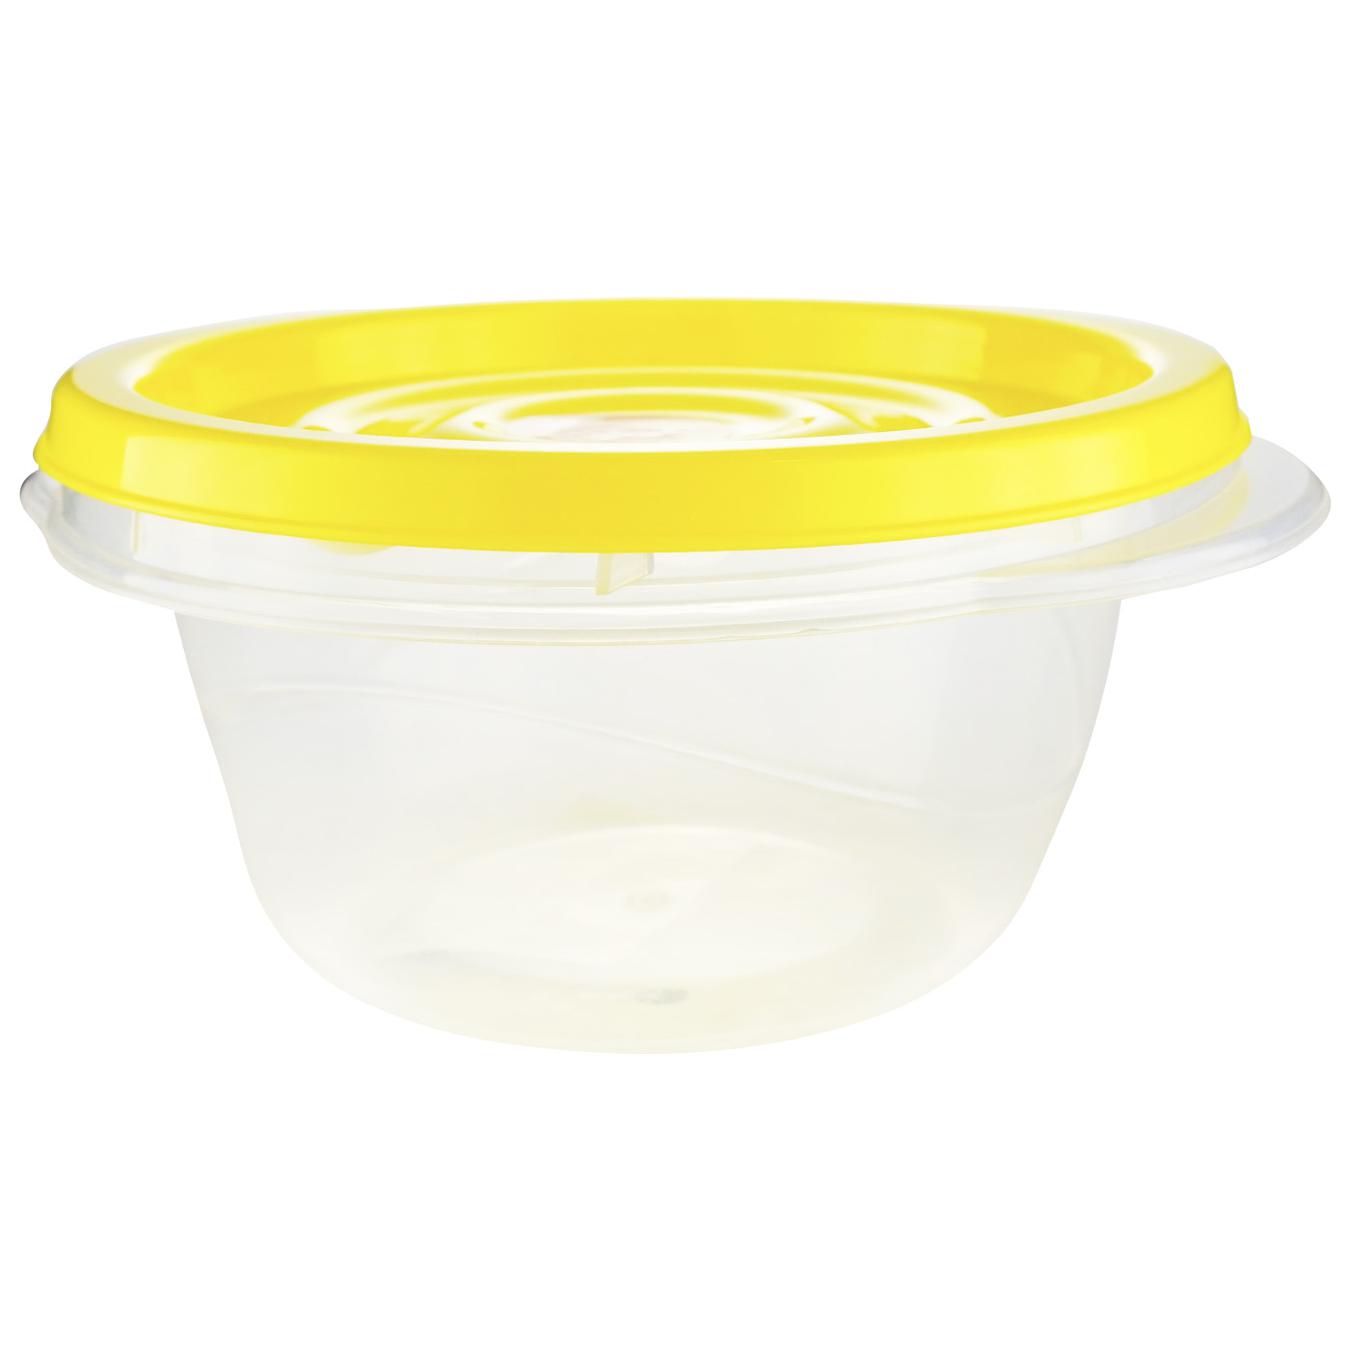 Aleana container for food storage Omega round transparent/dark yellow 0.44 l